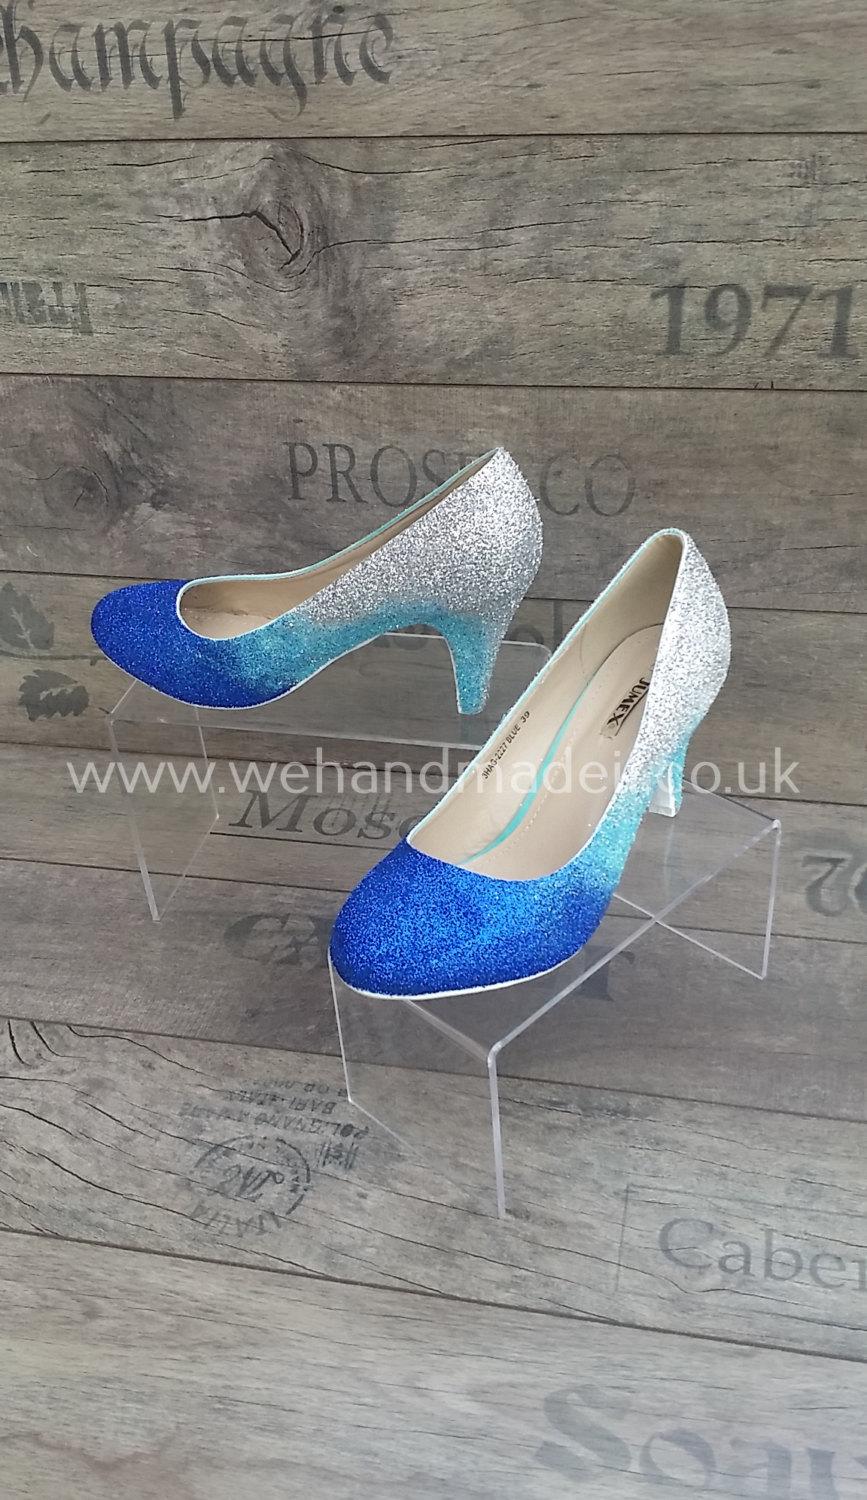 Hochzeit - Custom made blue to silver graded glitter shoes - any style or size.  Wedding shoes, prom shoes, custom glitter shoes made to order